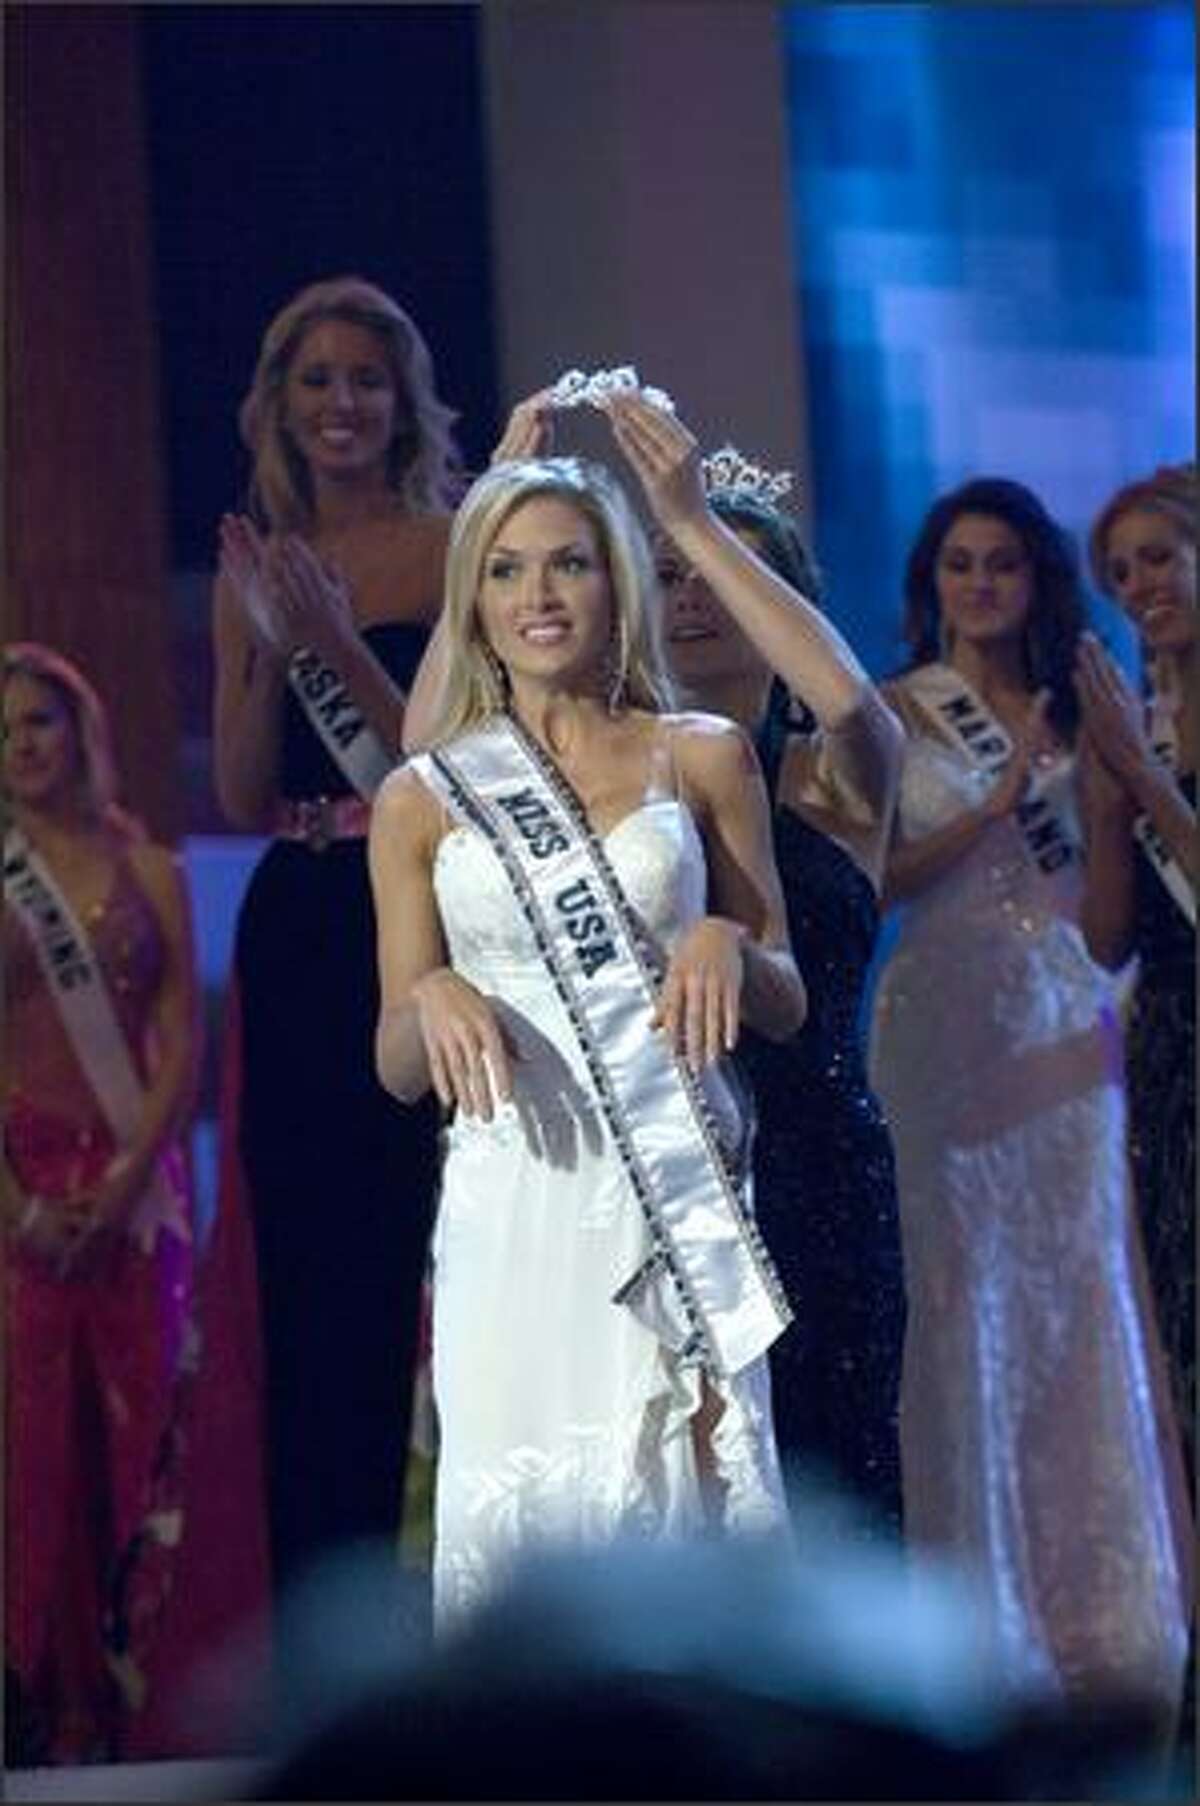 Tara Conner reacts after being crowned Miss USA.